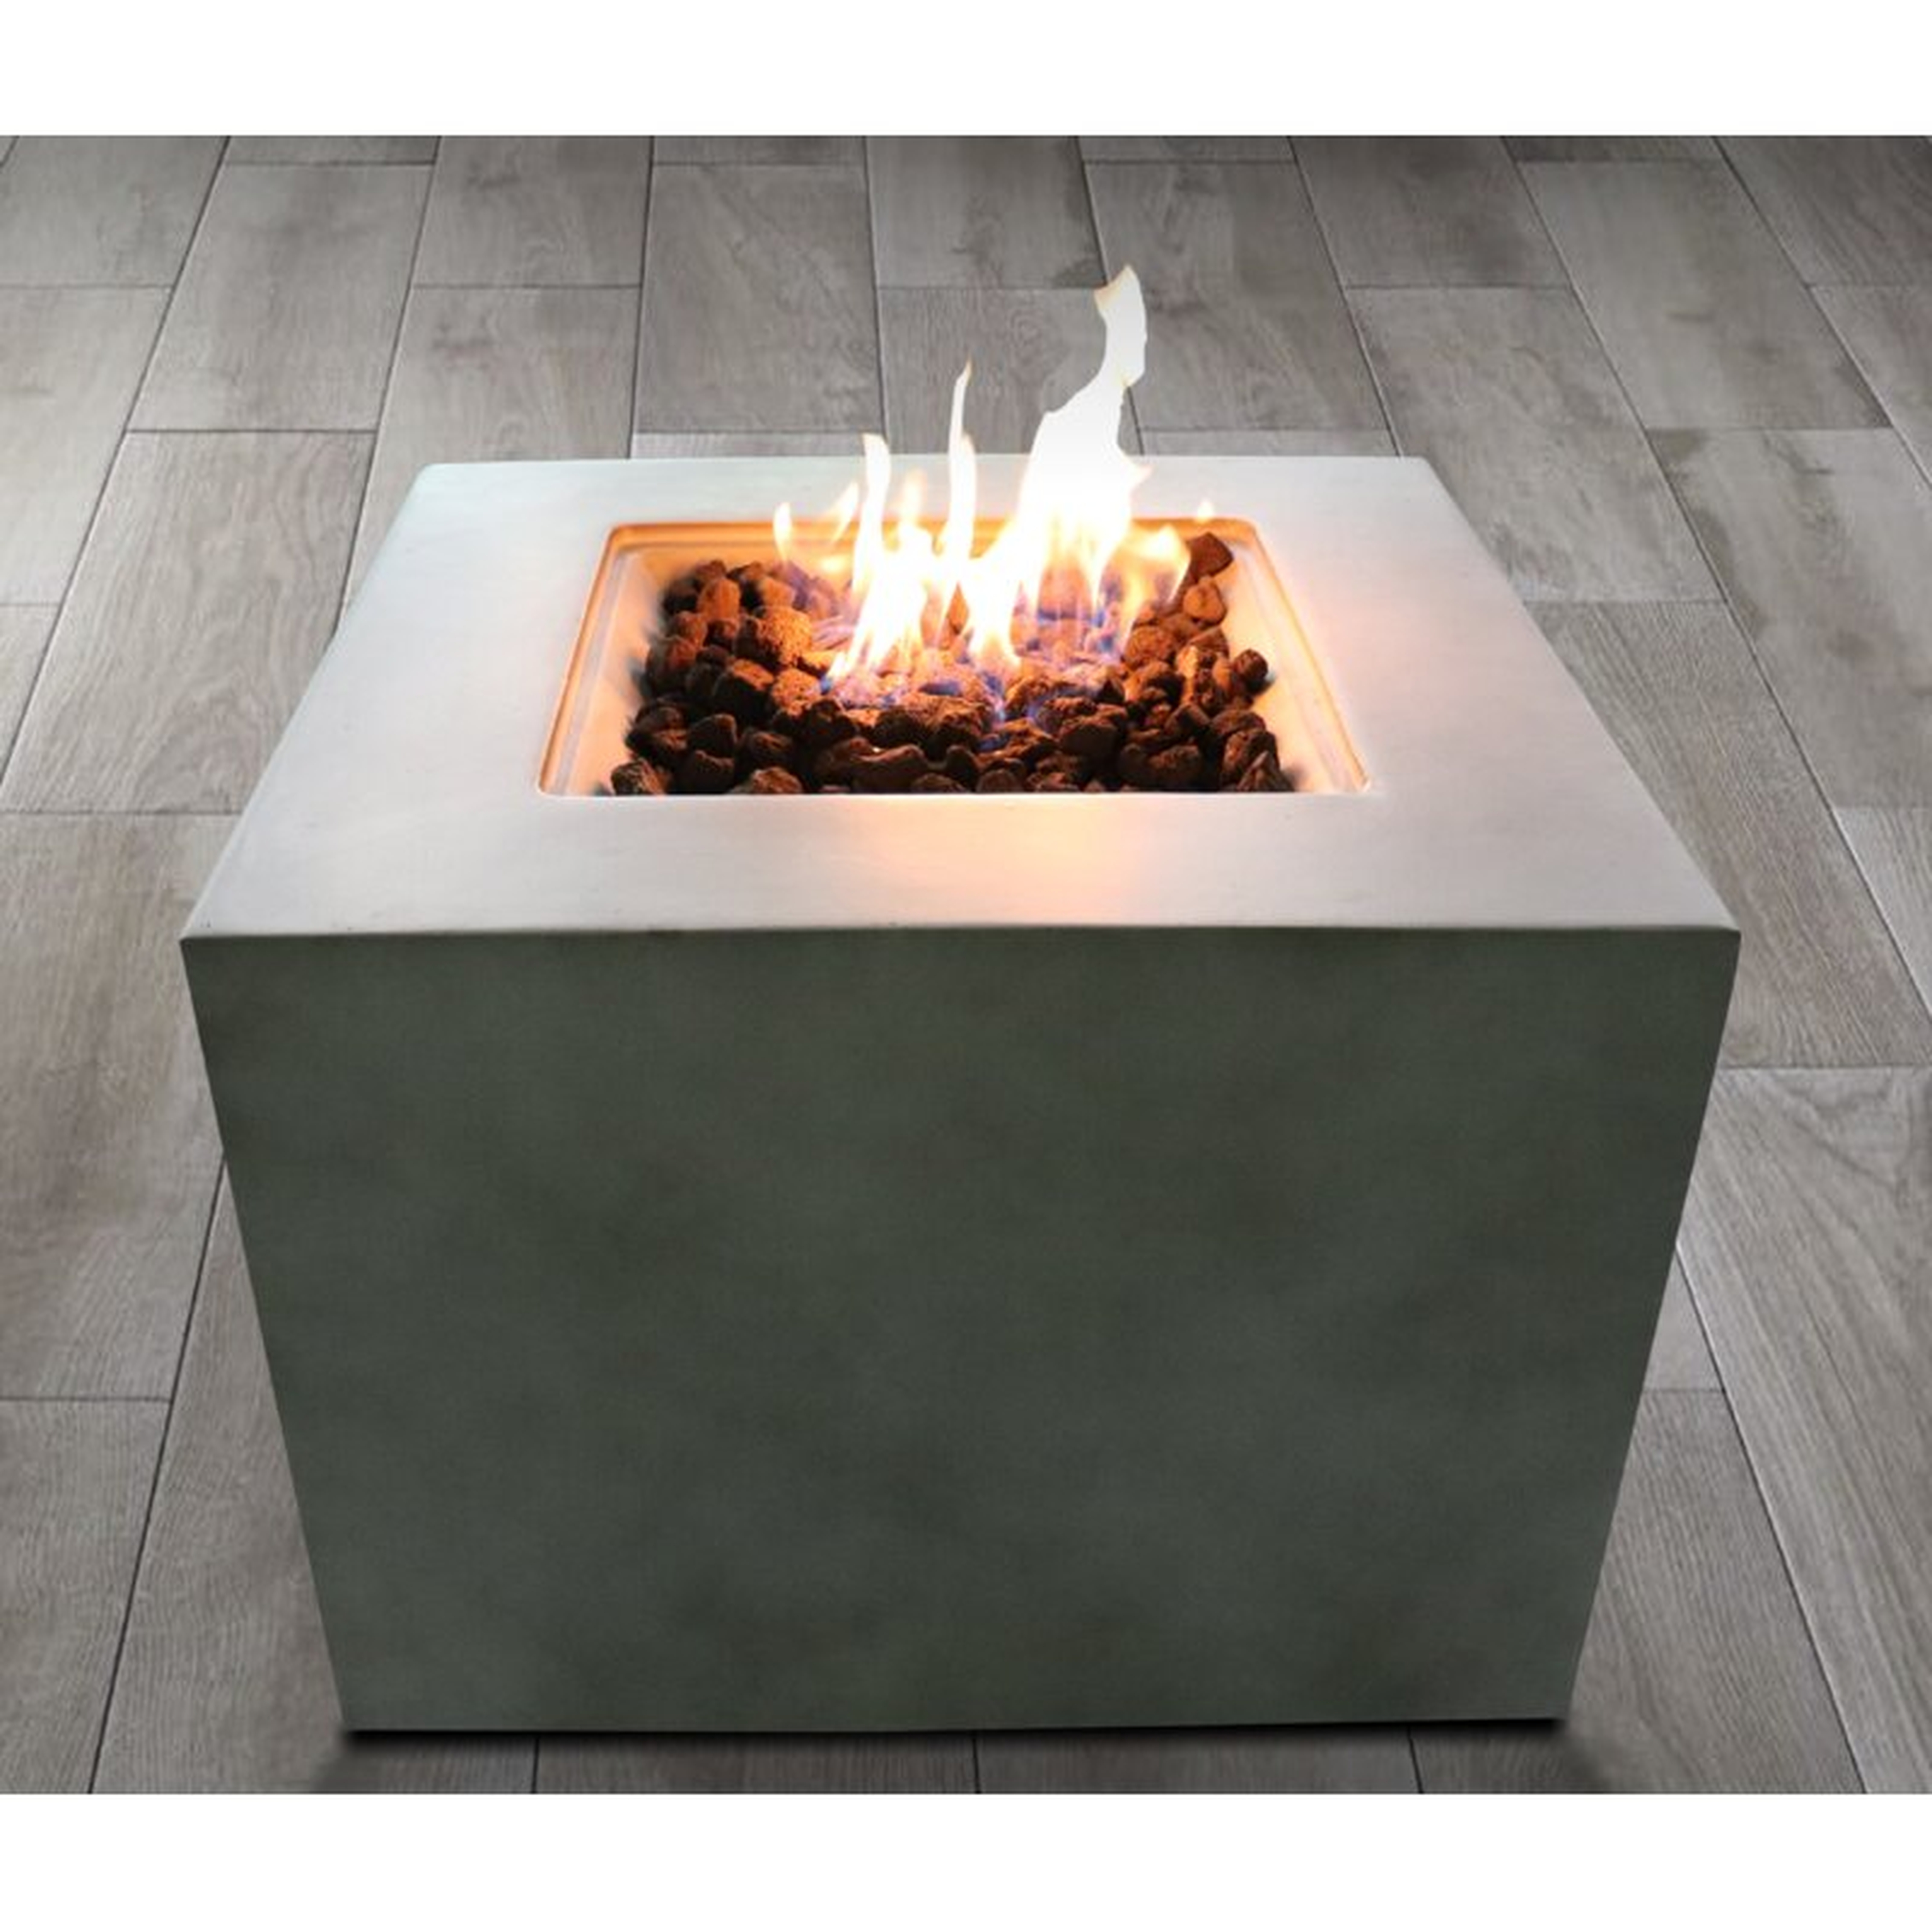 Nidhogg Box Polyresin and Stainless Steel Propane/Natural Gas Fire Pit - Wayfair